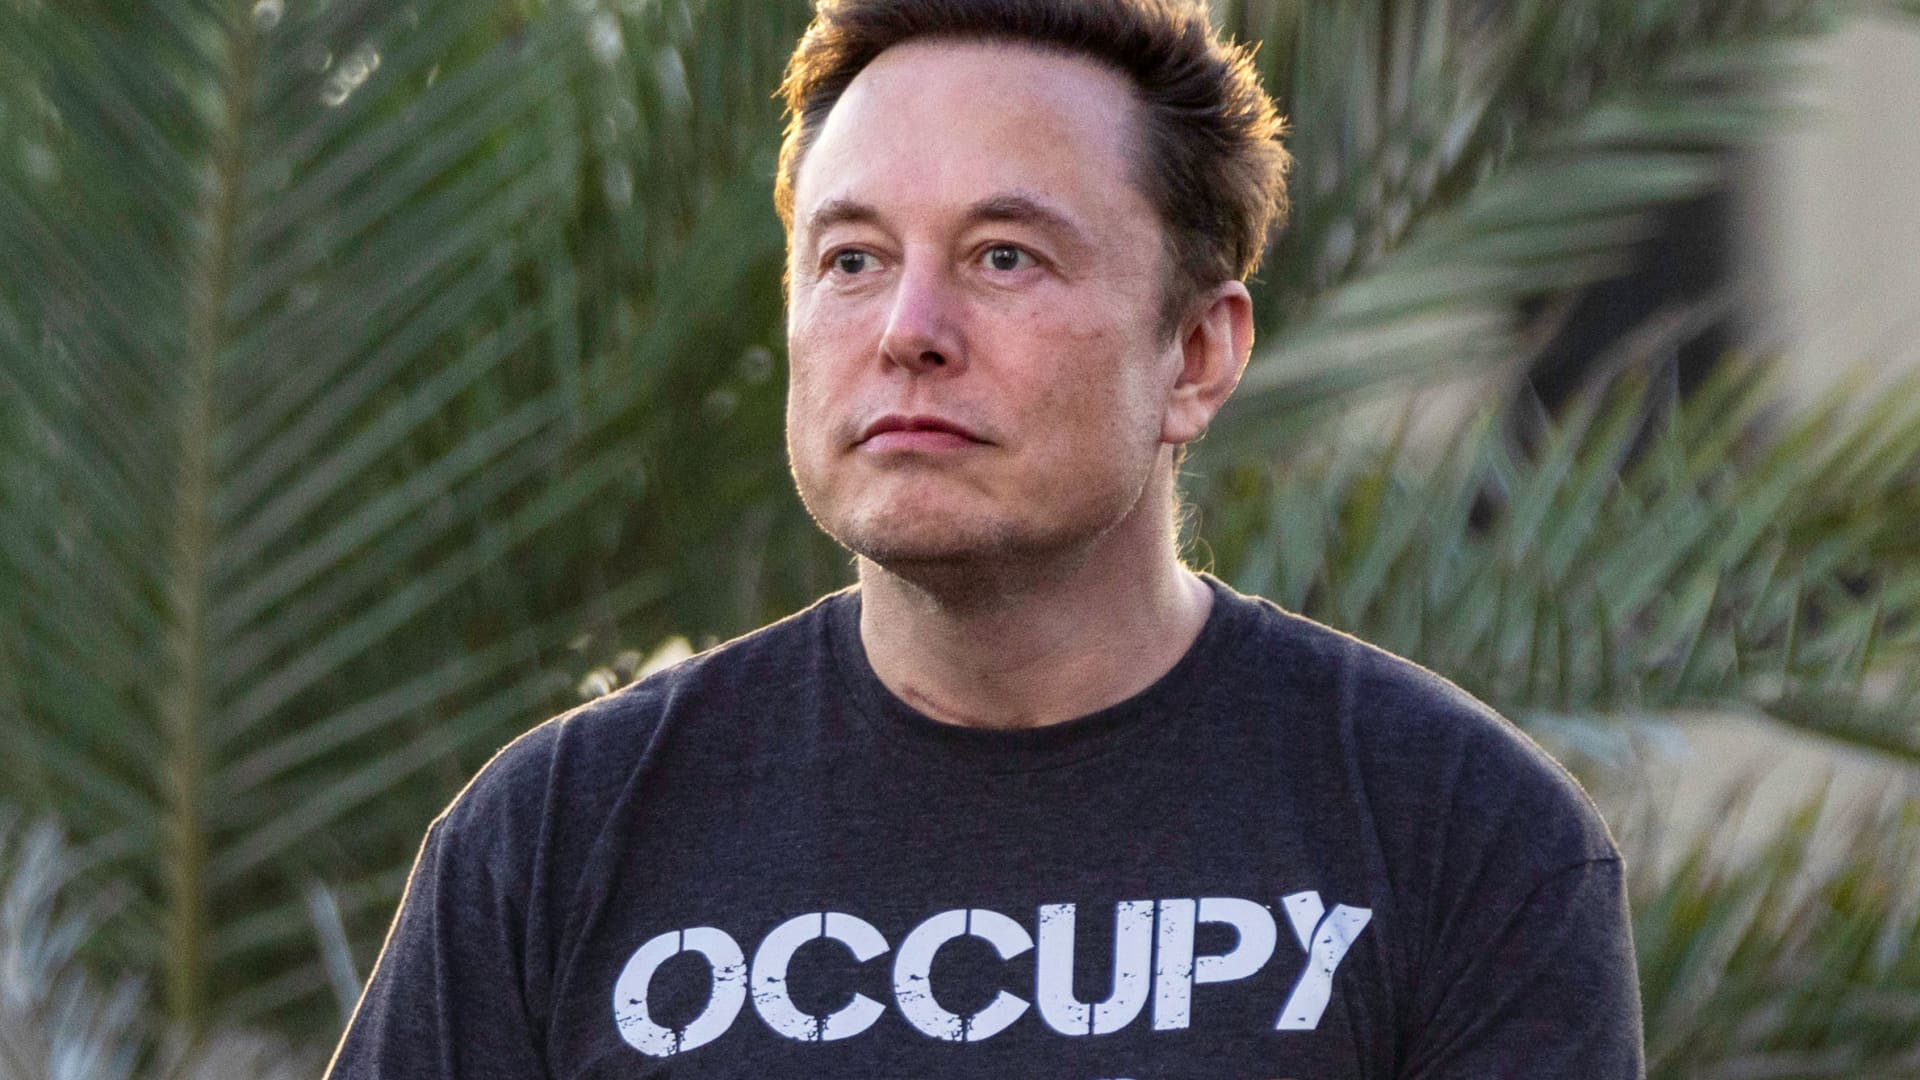 Elon Musk, new owner of Twitter, tweets unfounded, anti-LGBTQ conspiracy theory about Paul Pelosi attack